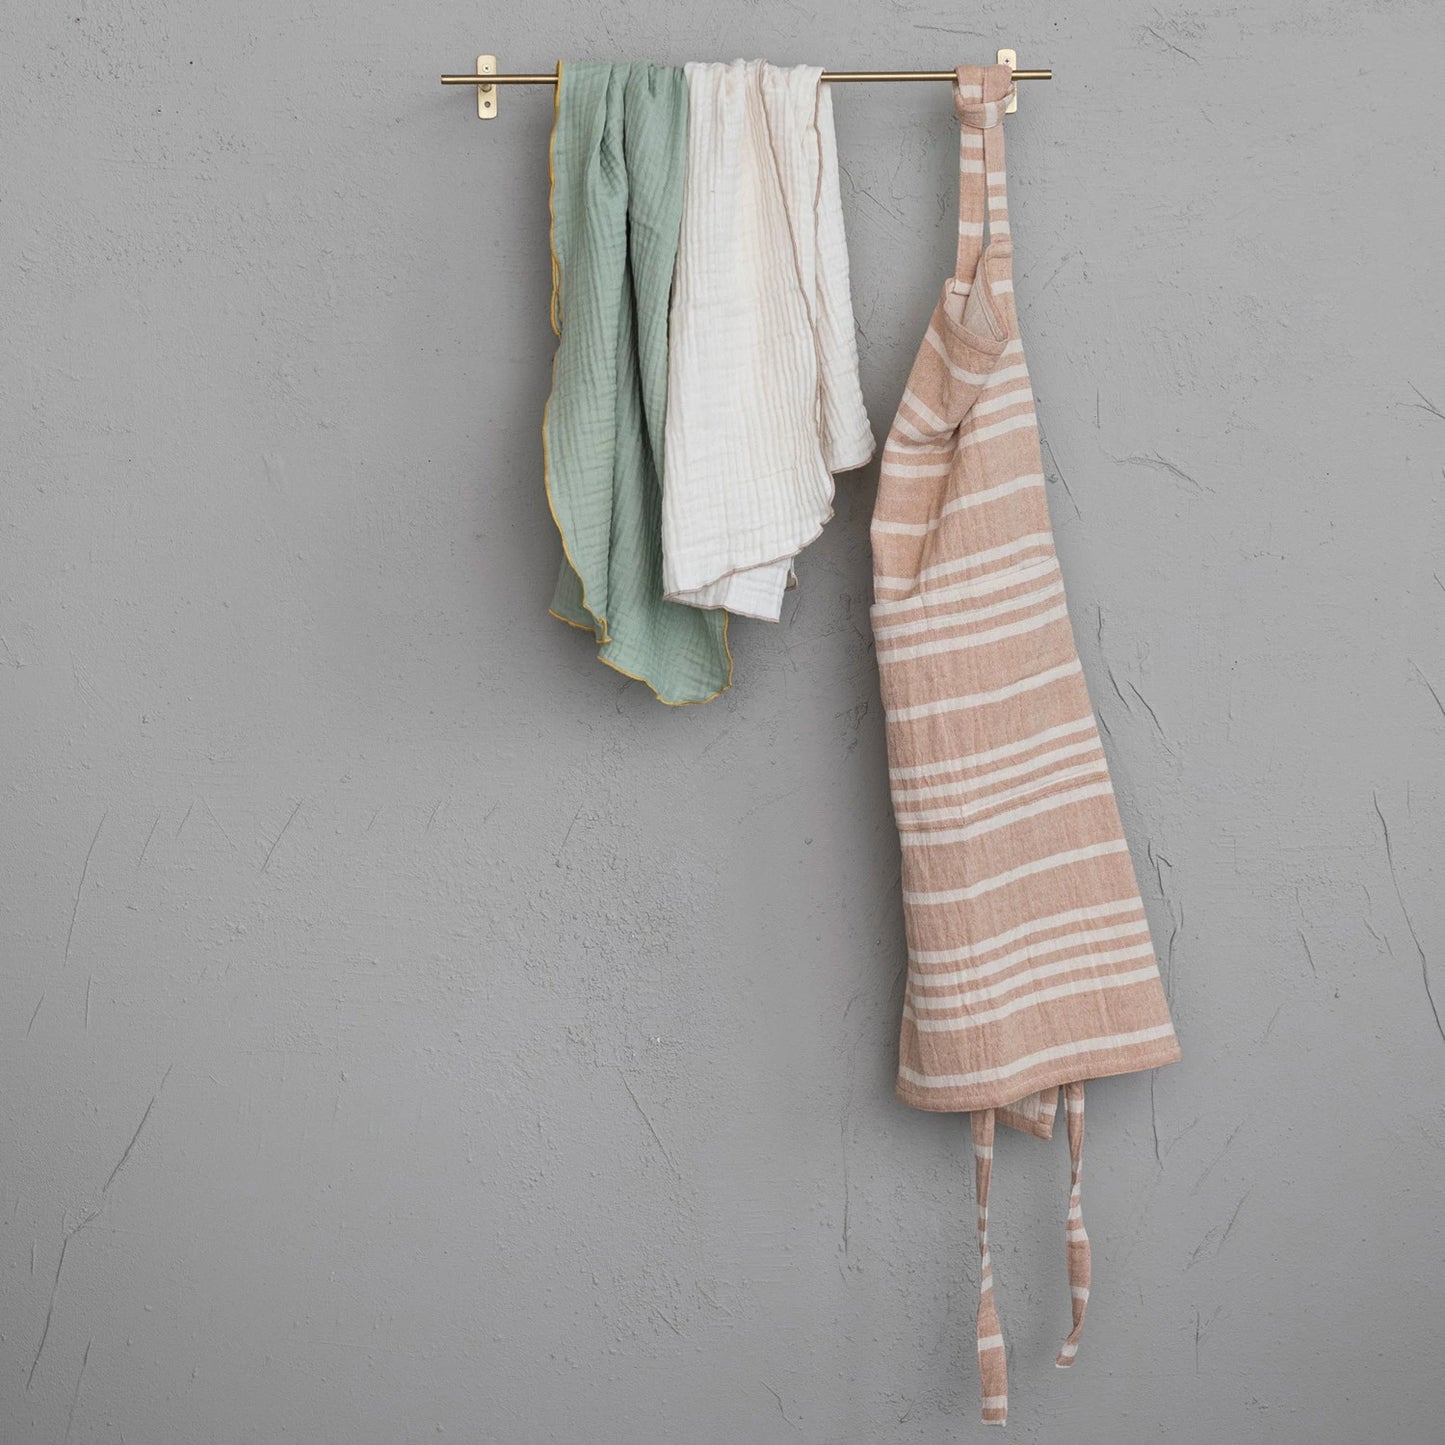 front view of gold metal rod mounted to grey wall with towels and an apron hanging on it.